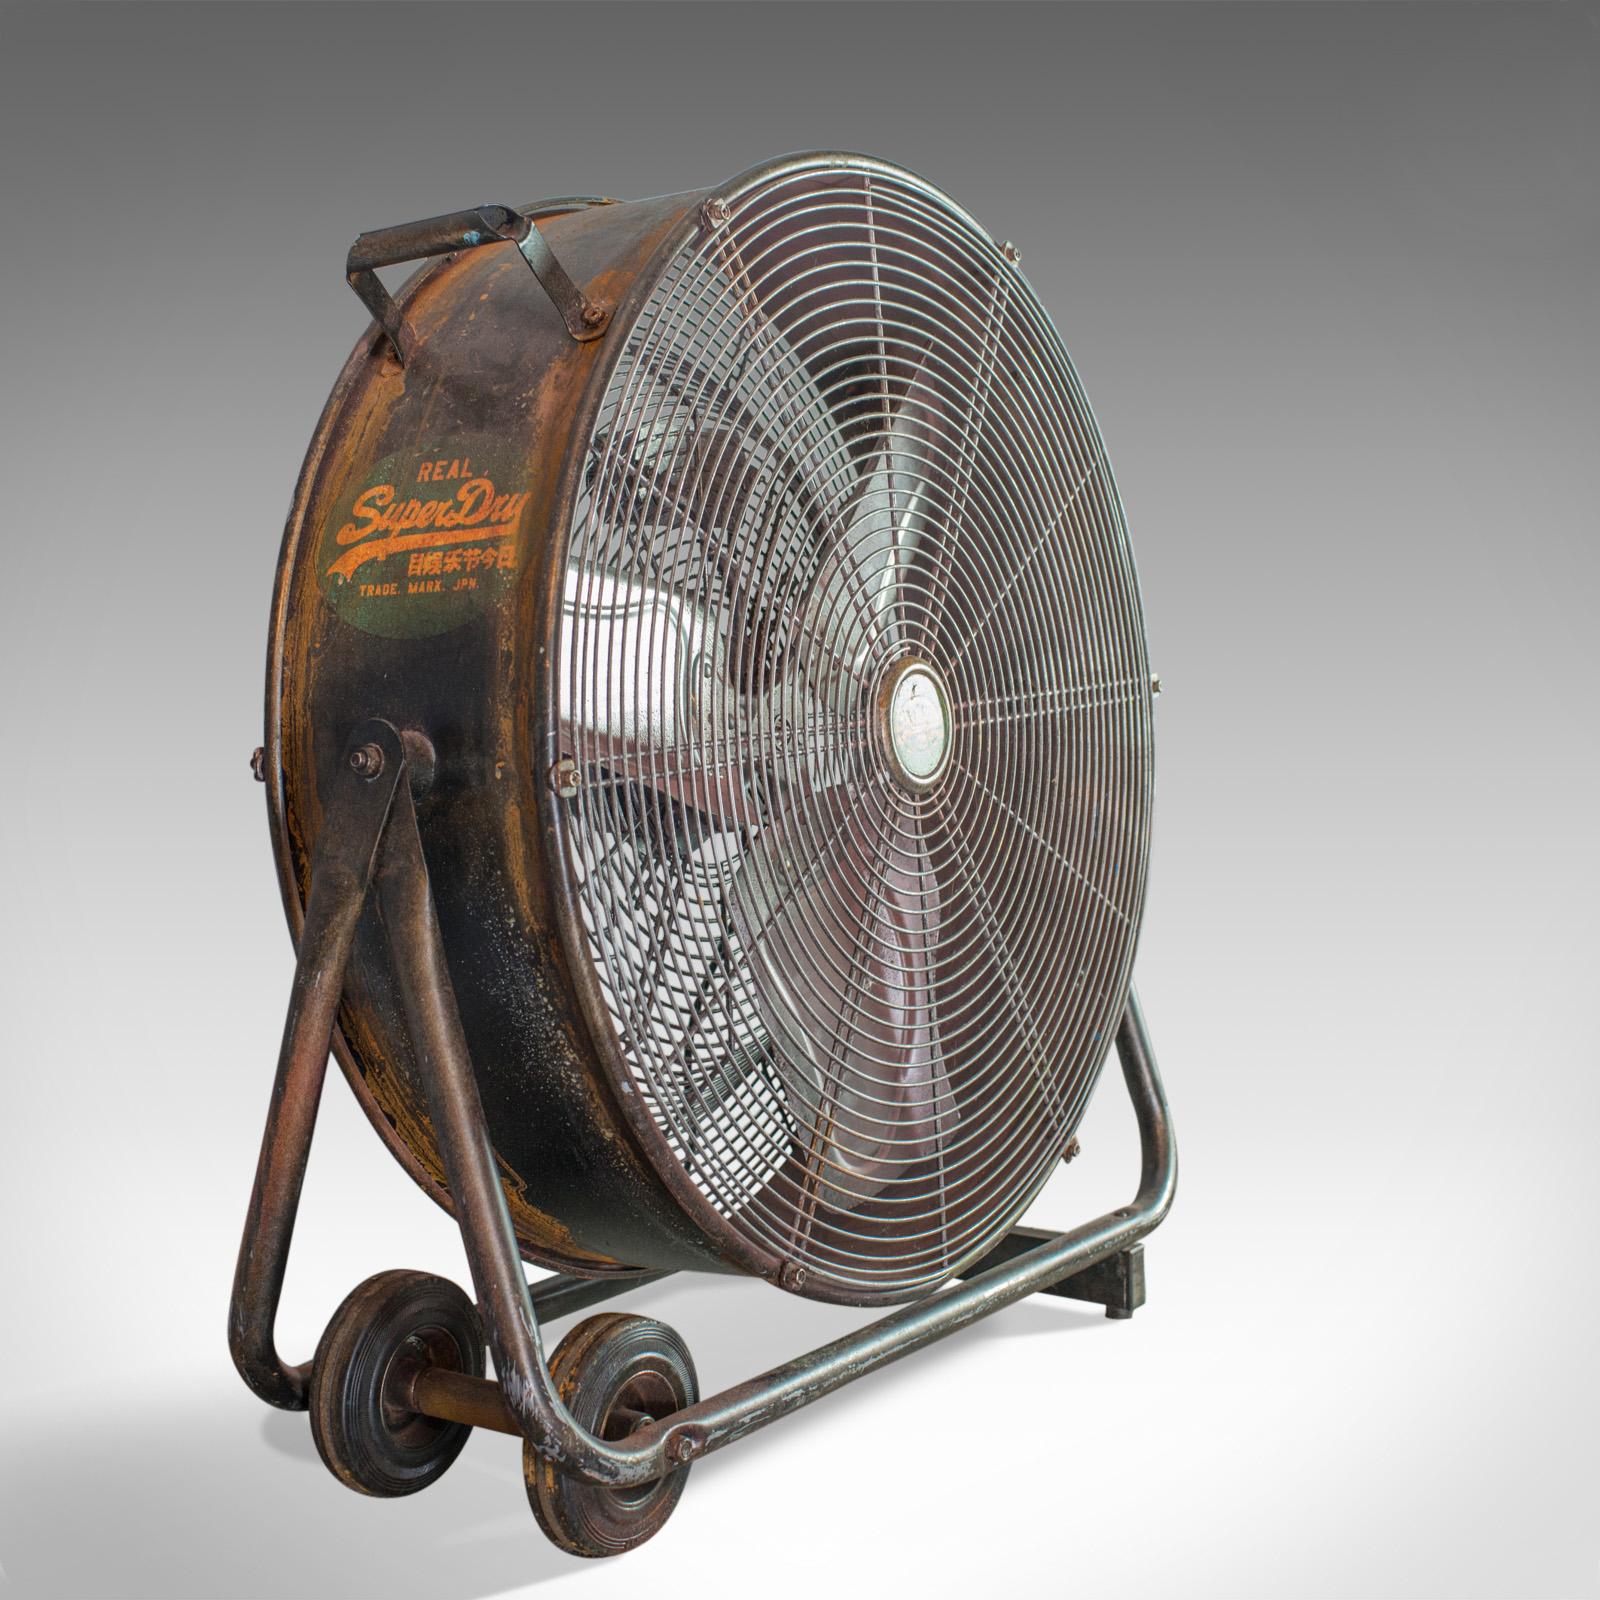 This is a large, floor standing fan. A powerful, Superdry branded, industrial cooling fan.

Uber cool distressed Industrial finish
Branded with the 'Superdry' logo
Speed regulator for stepped performance
Tilts in frame right up to a vertical